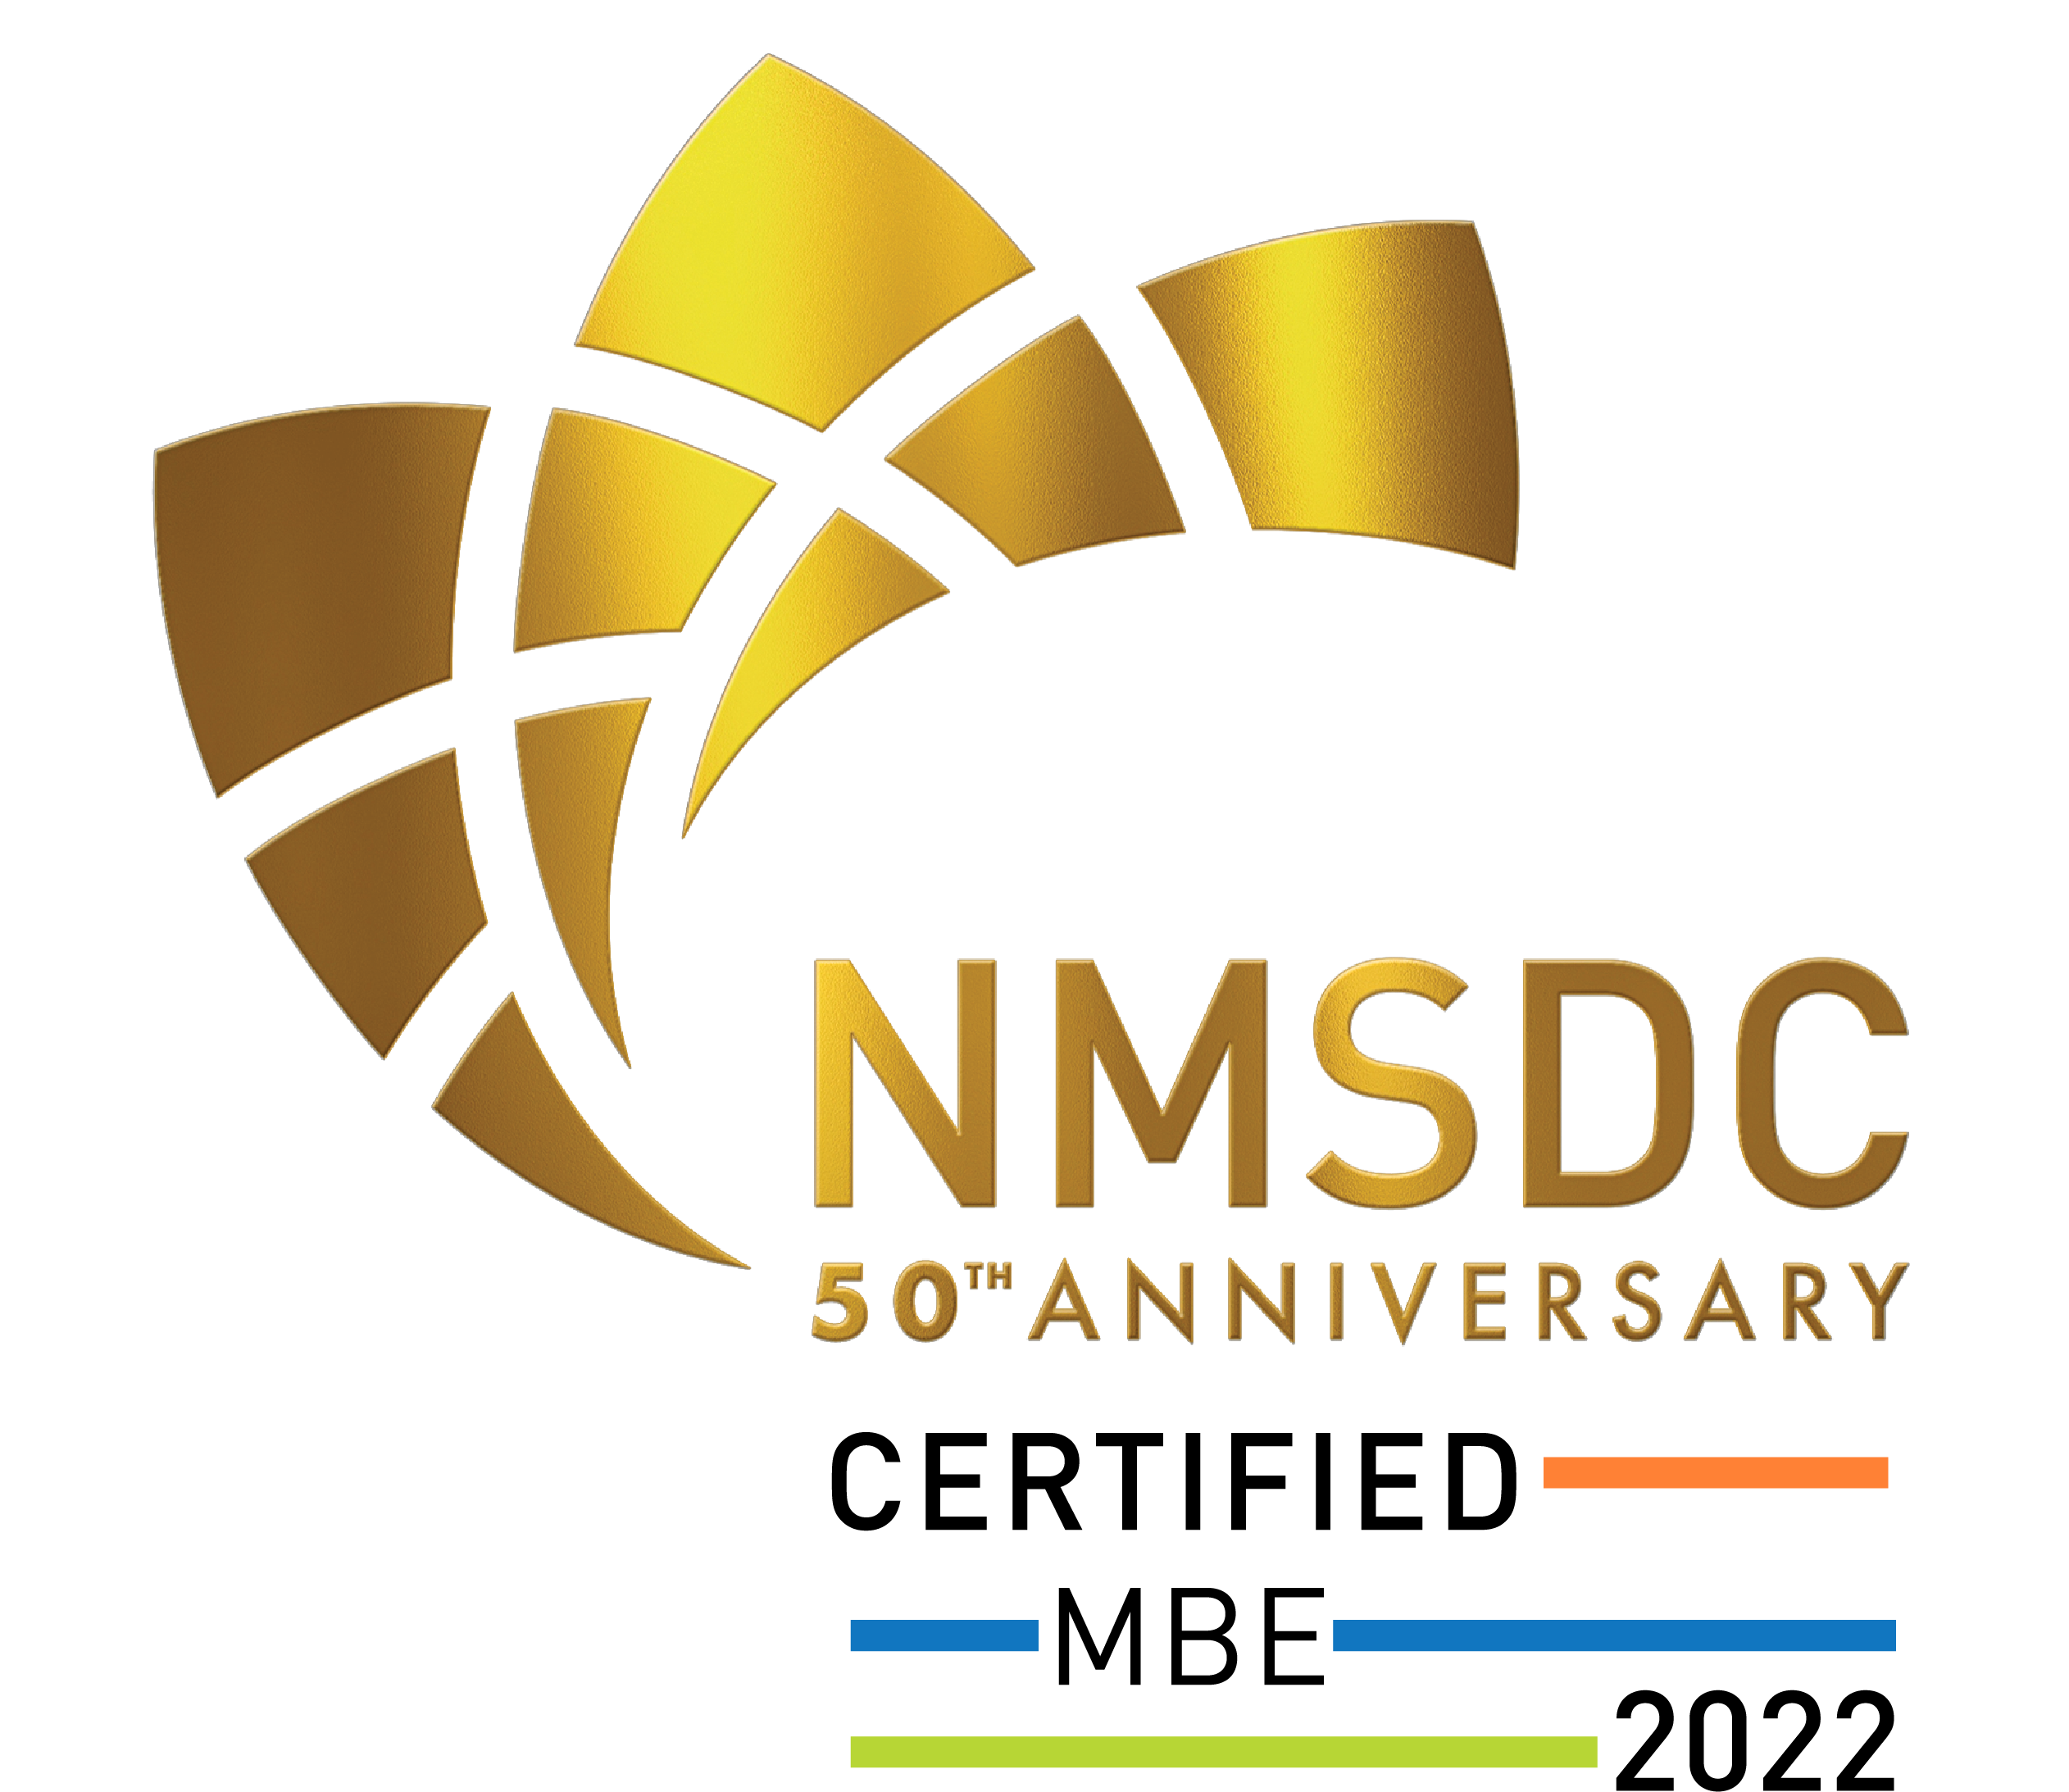 163-nmsdc-certified-mbe-2022-50anni.png